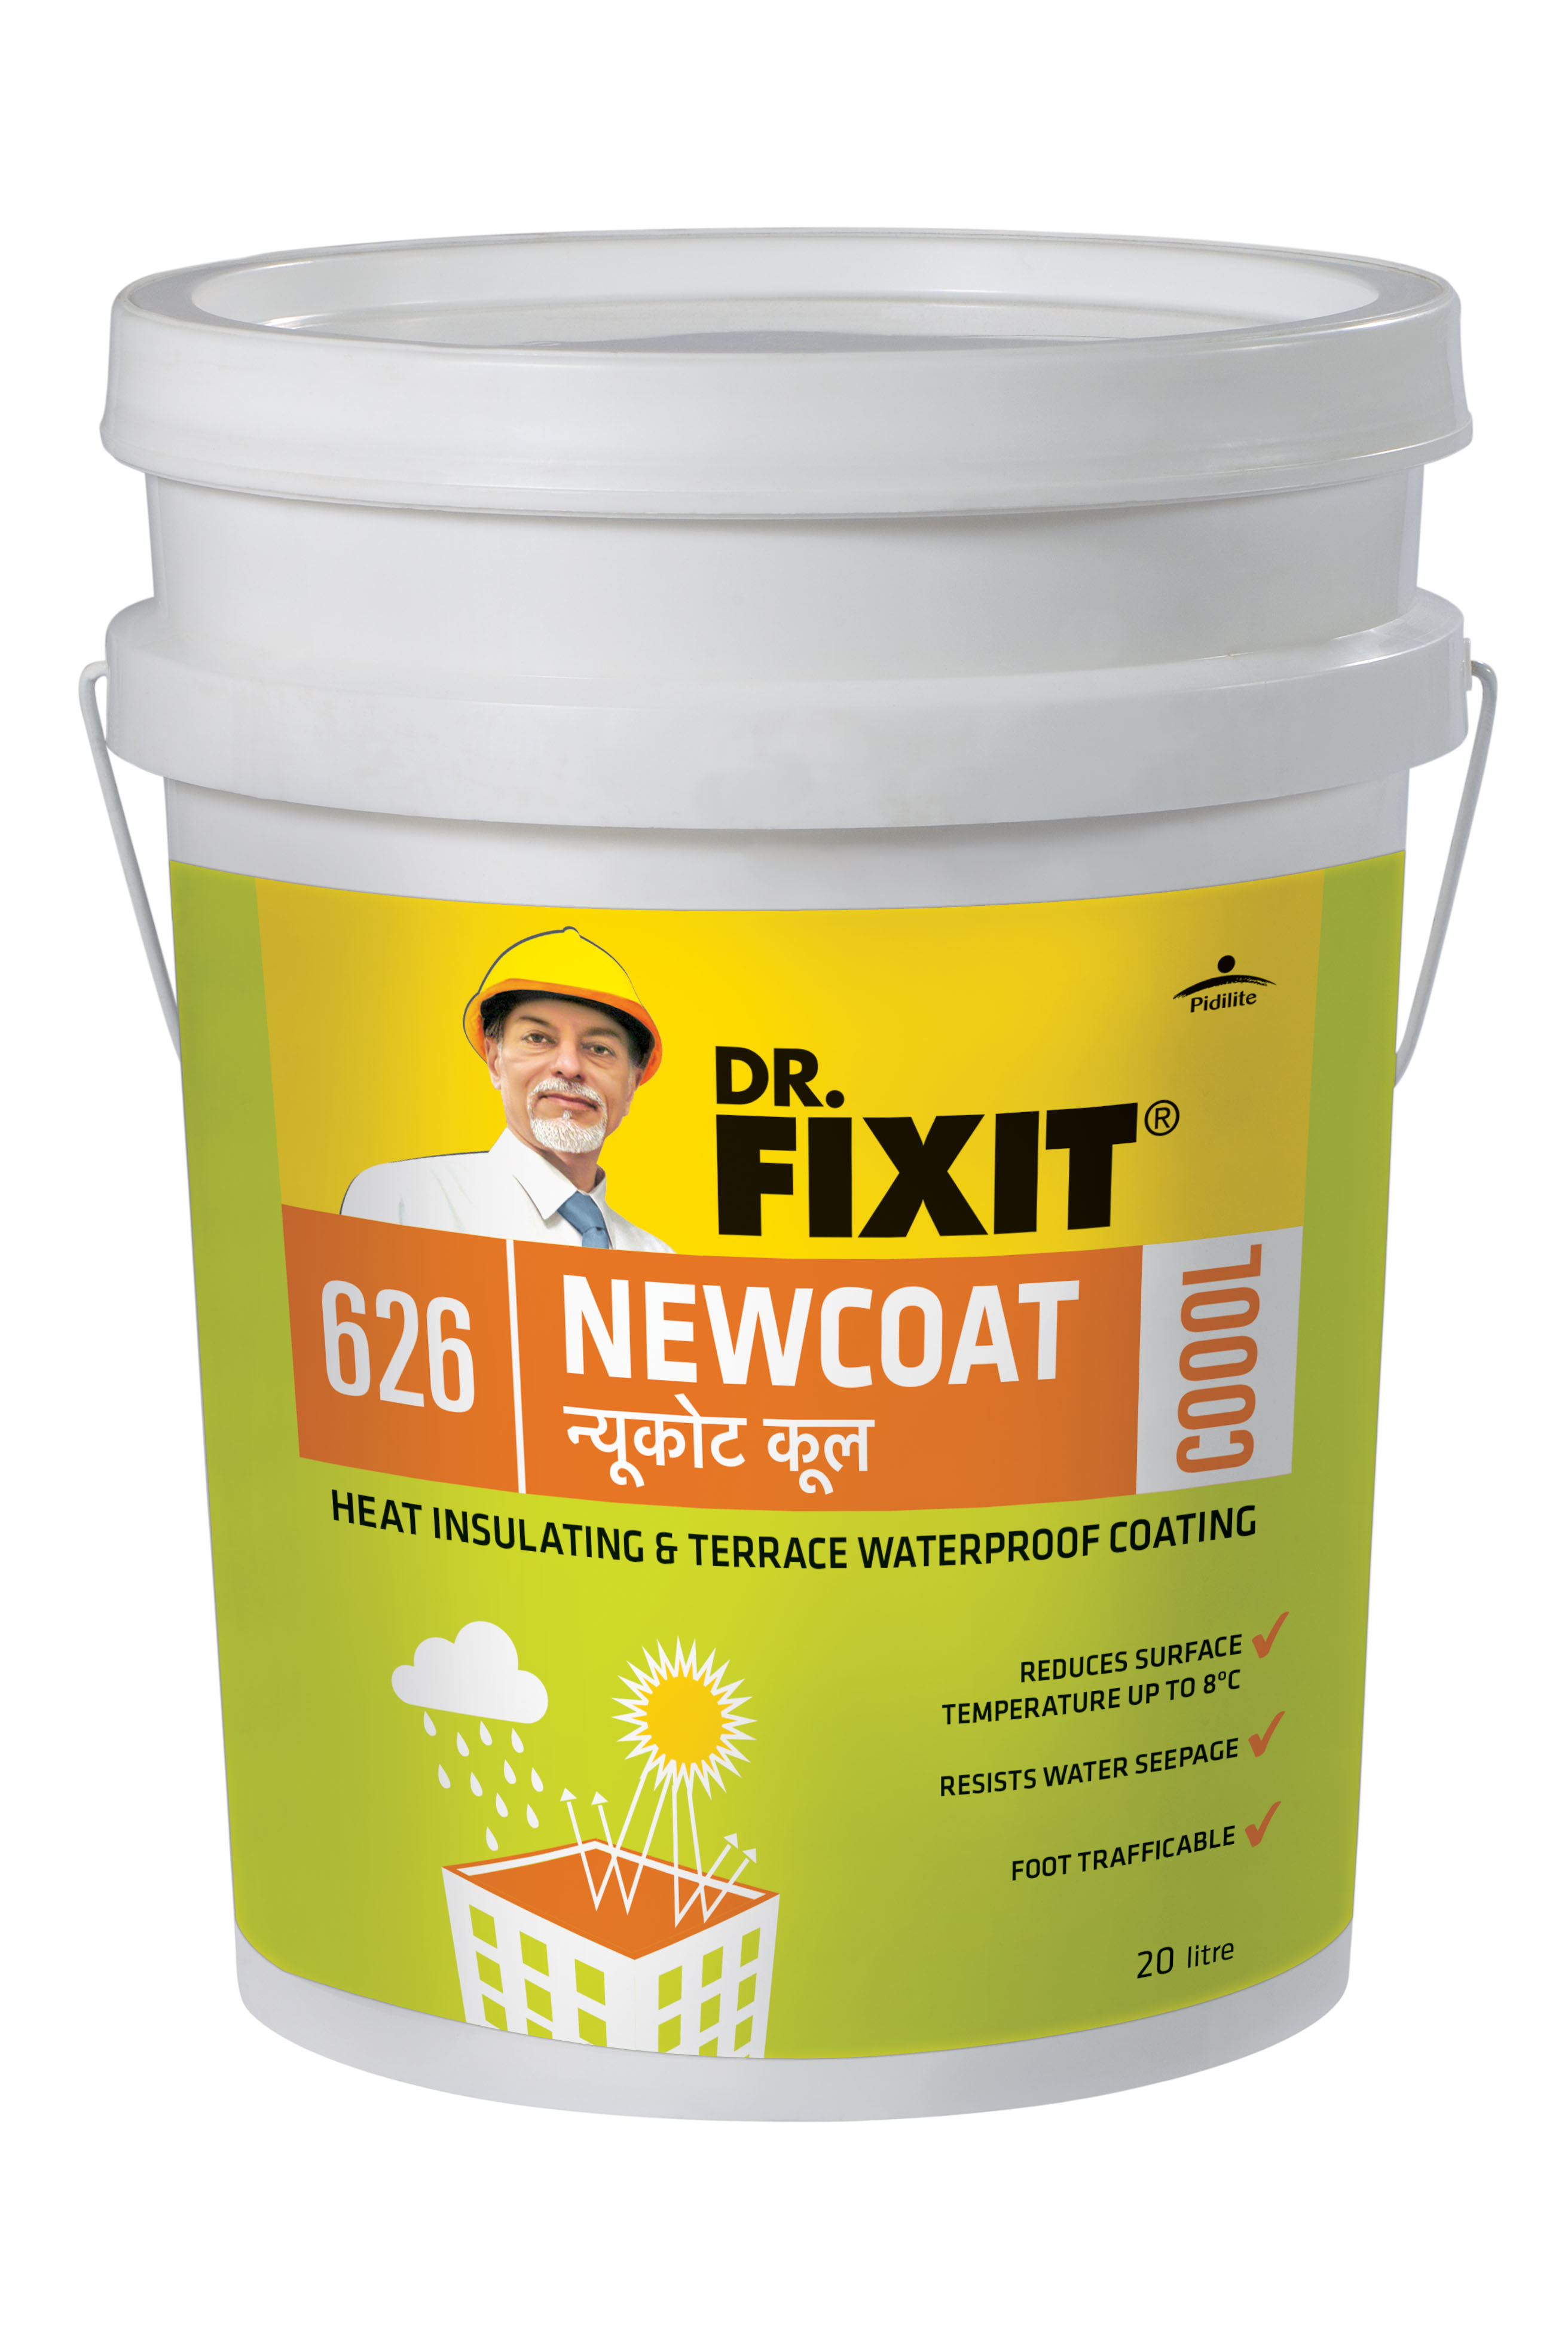 Dr Fixit New Coat Cool price 1 ltr, 20 litre price, colours shades, 10 4 colors